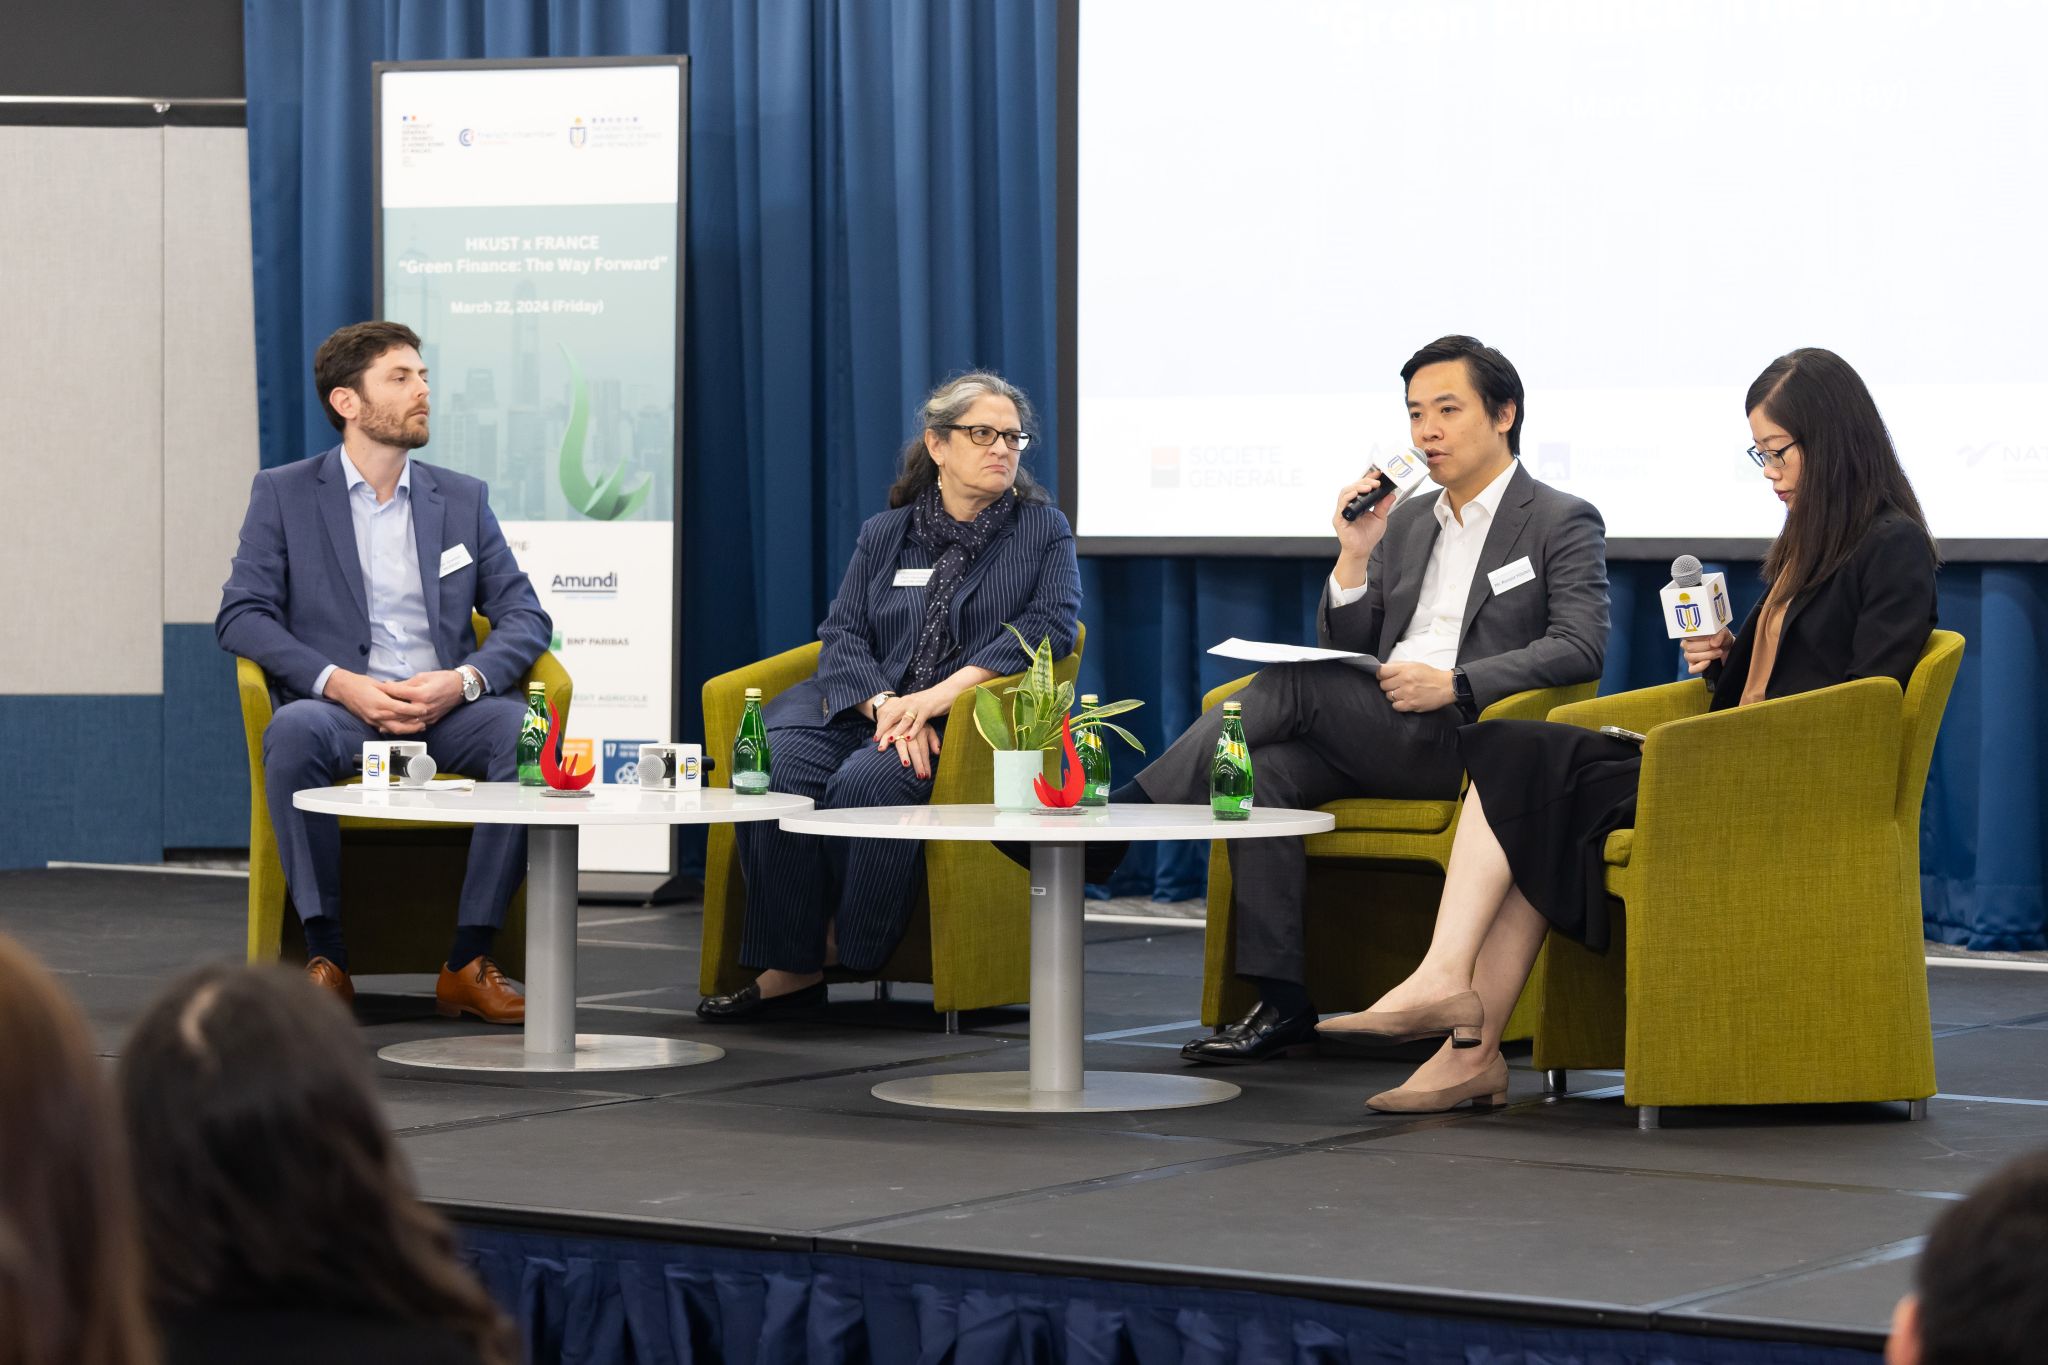 Expert panel featuring Prof. Véronique LAFON-VINAIS (second left), Program Co-Director of BSc in Sustainable and Green Finance at HKUST Business School, Mr. Ronald YOUNG (second right), Head of Sustainable Finance Asia at Société Générale, Ms. Kristy WONG (first right), Associate Director of ESG Investment Specialist at Amundi Asset Management and Prof. Quentin MOREAU(first left), Assistant Professor of the Division of Environment and Sustainability at HKUST.